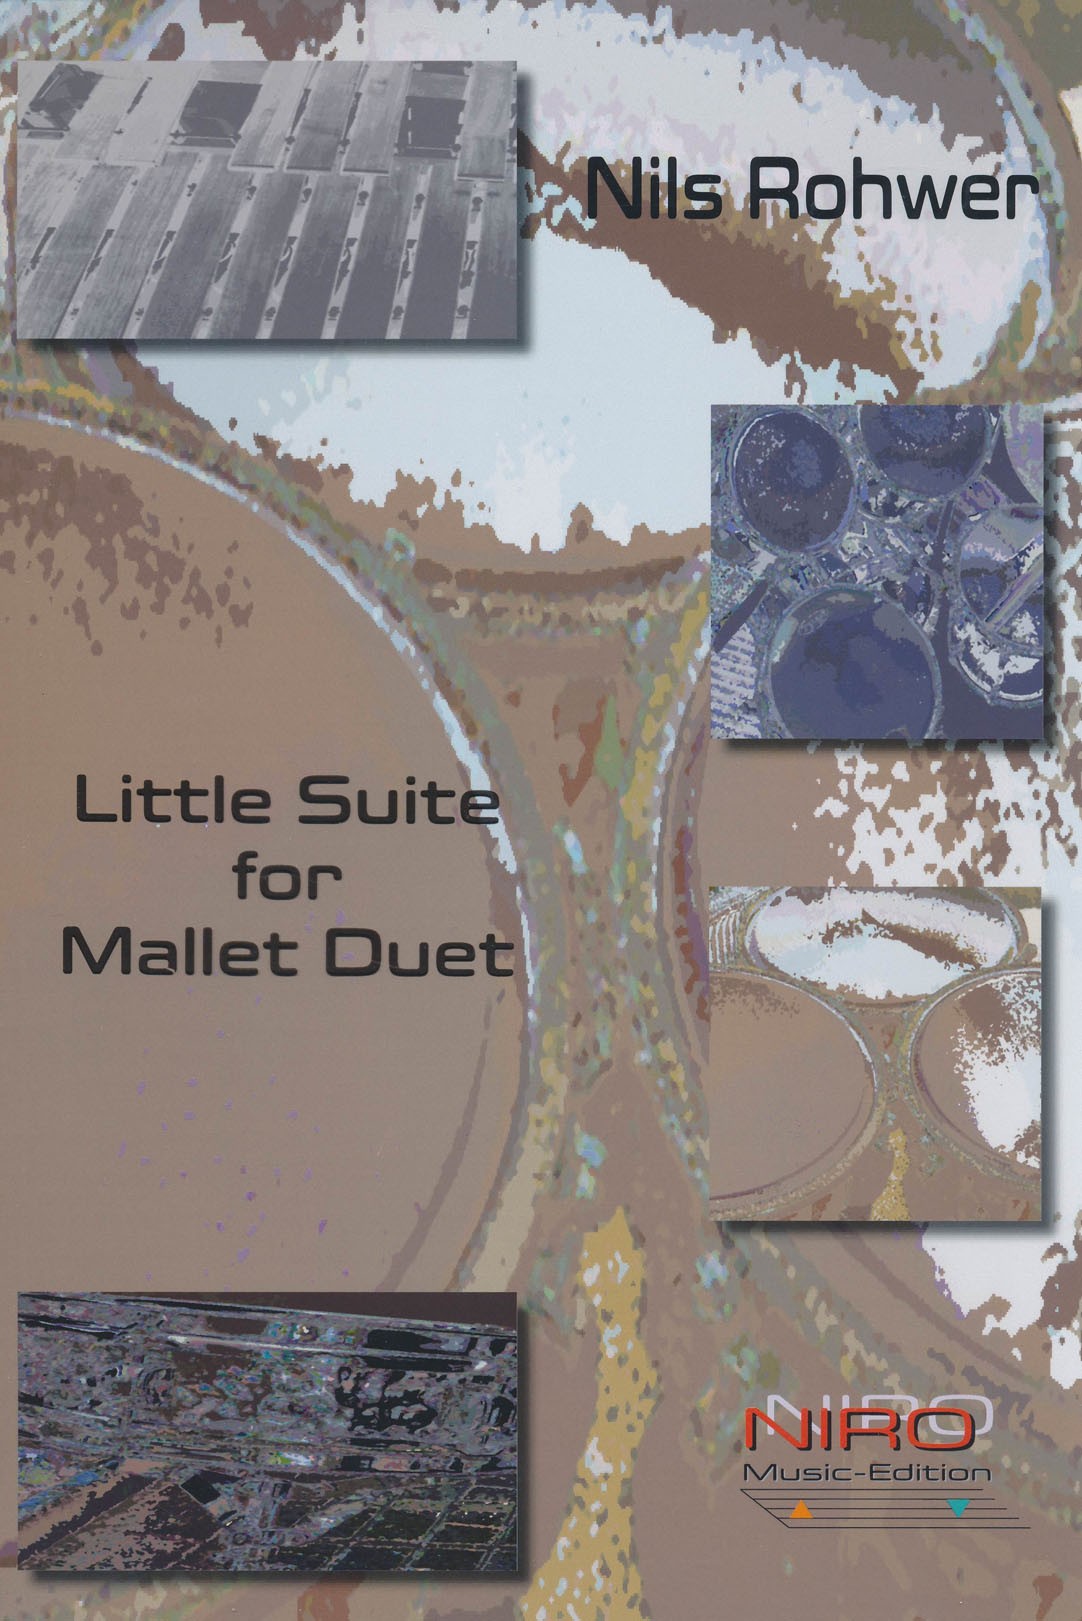 Little Suite for Mallet Duet by Nils Rohwer